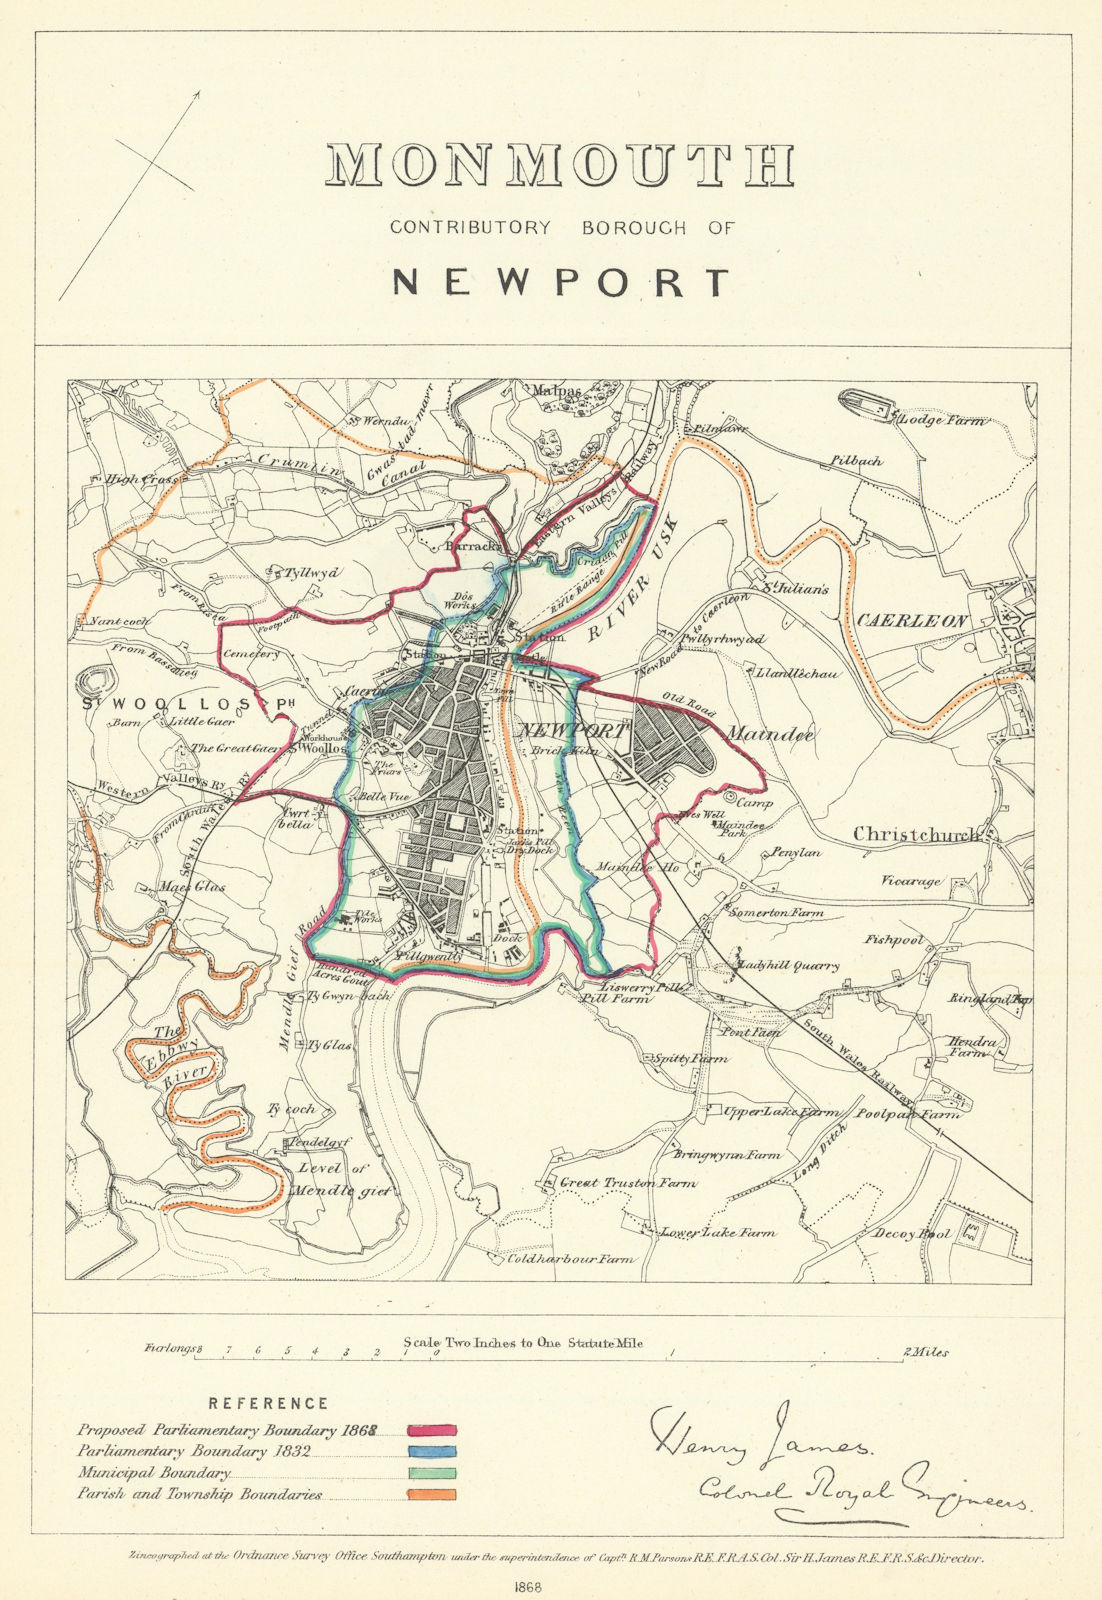 Monmouth Contributory Borough of Newport. JAMES. Boundary Commission 1868 map